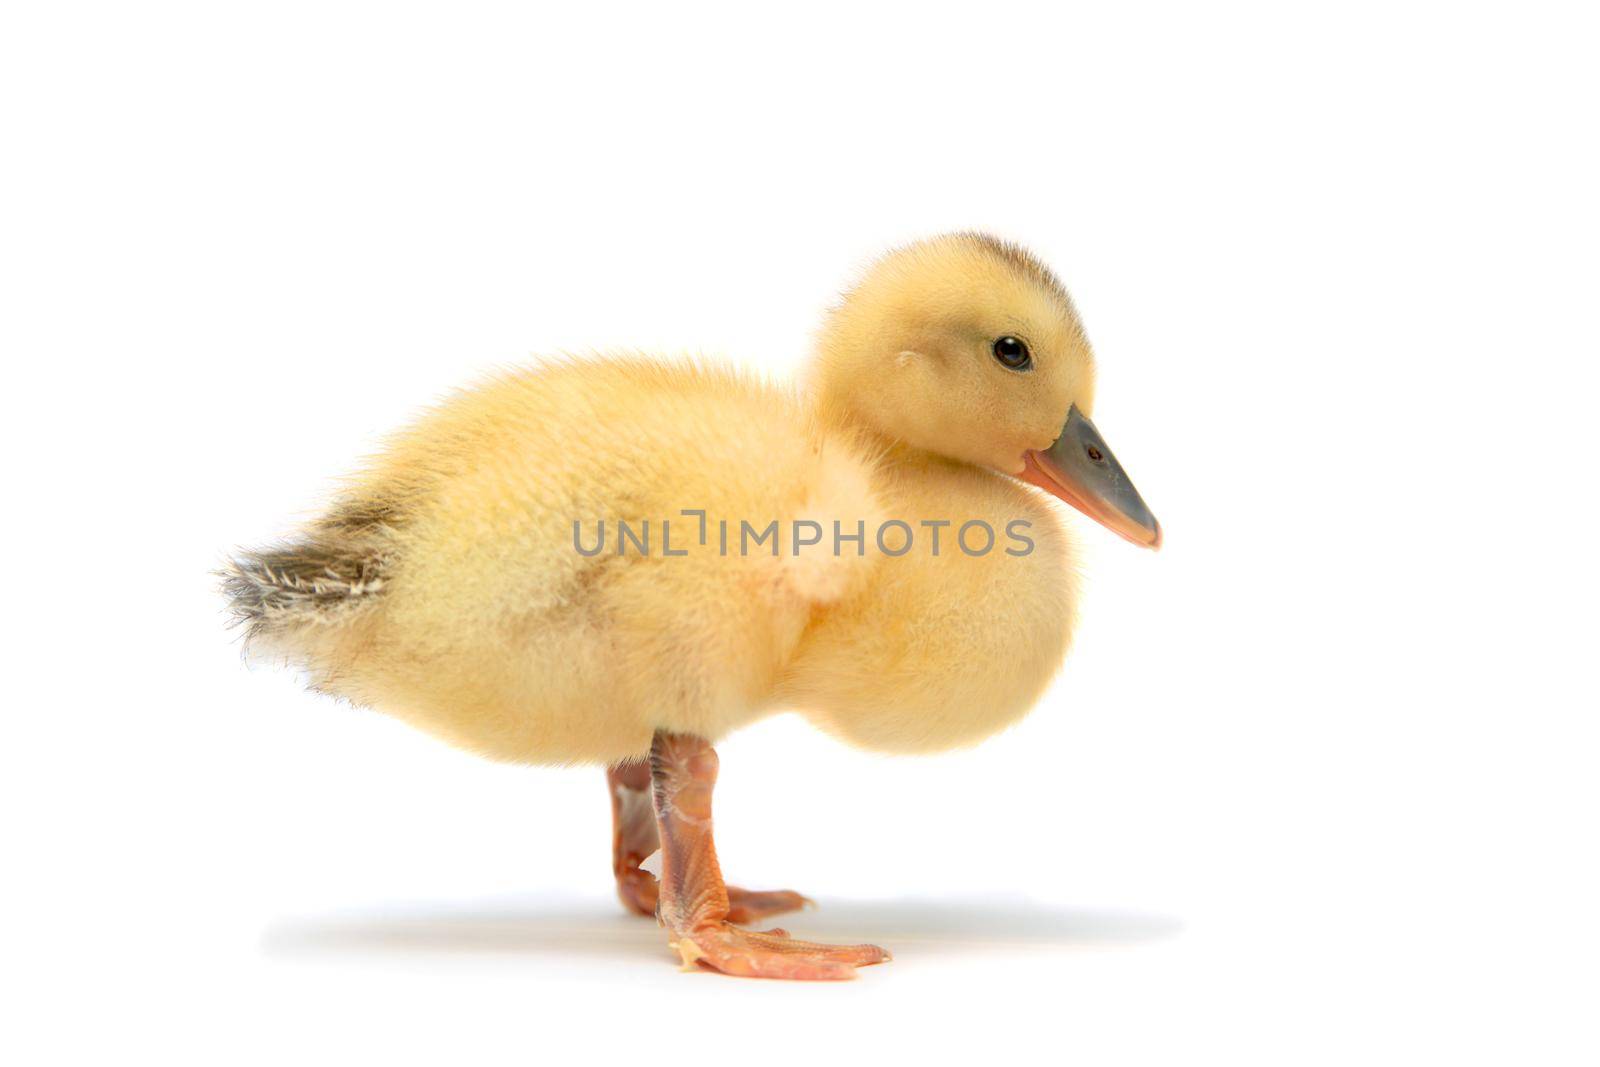 Small pretty duckling, 2 days old, isolated on white background